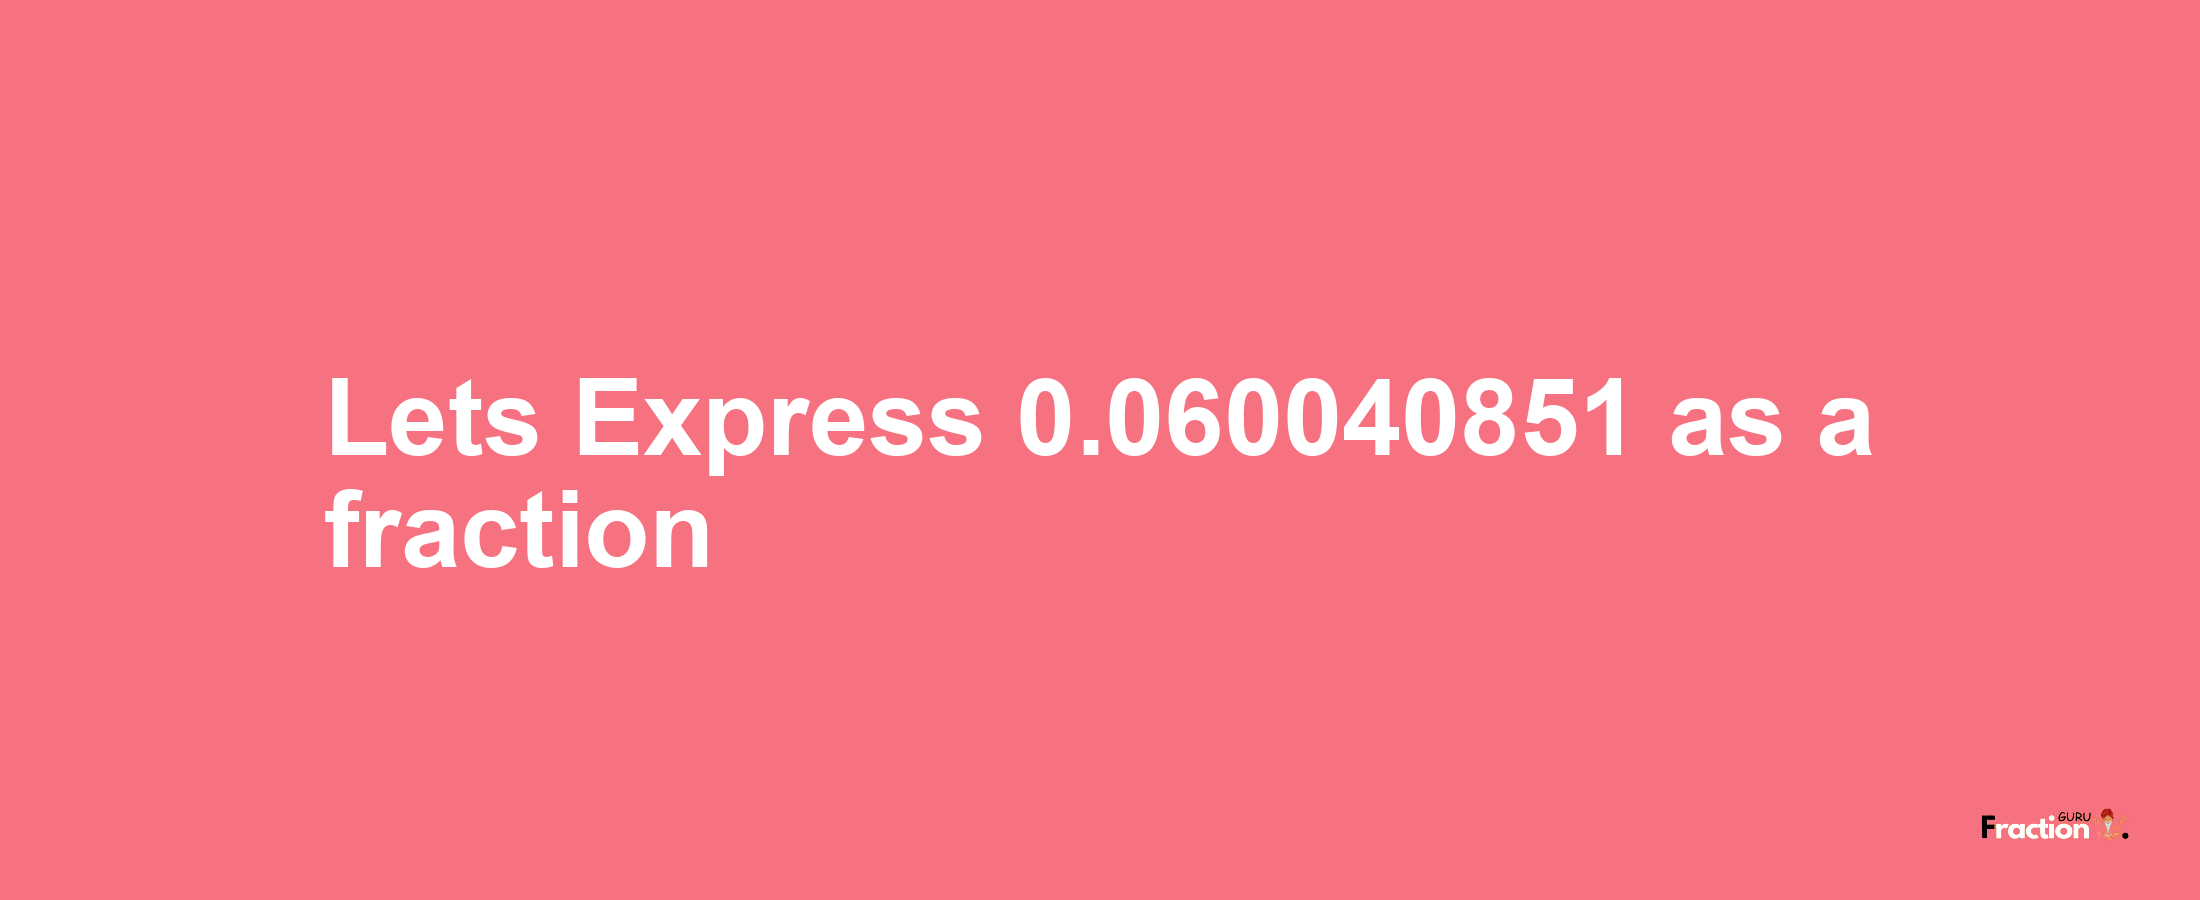 Lets Express 0.060040851 as afraction